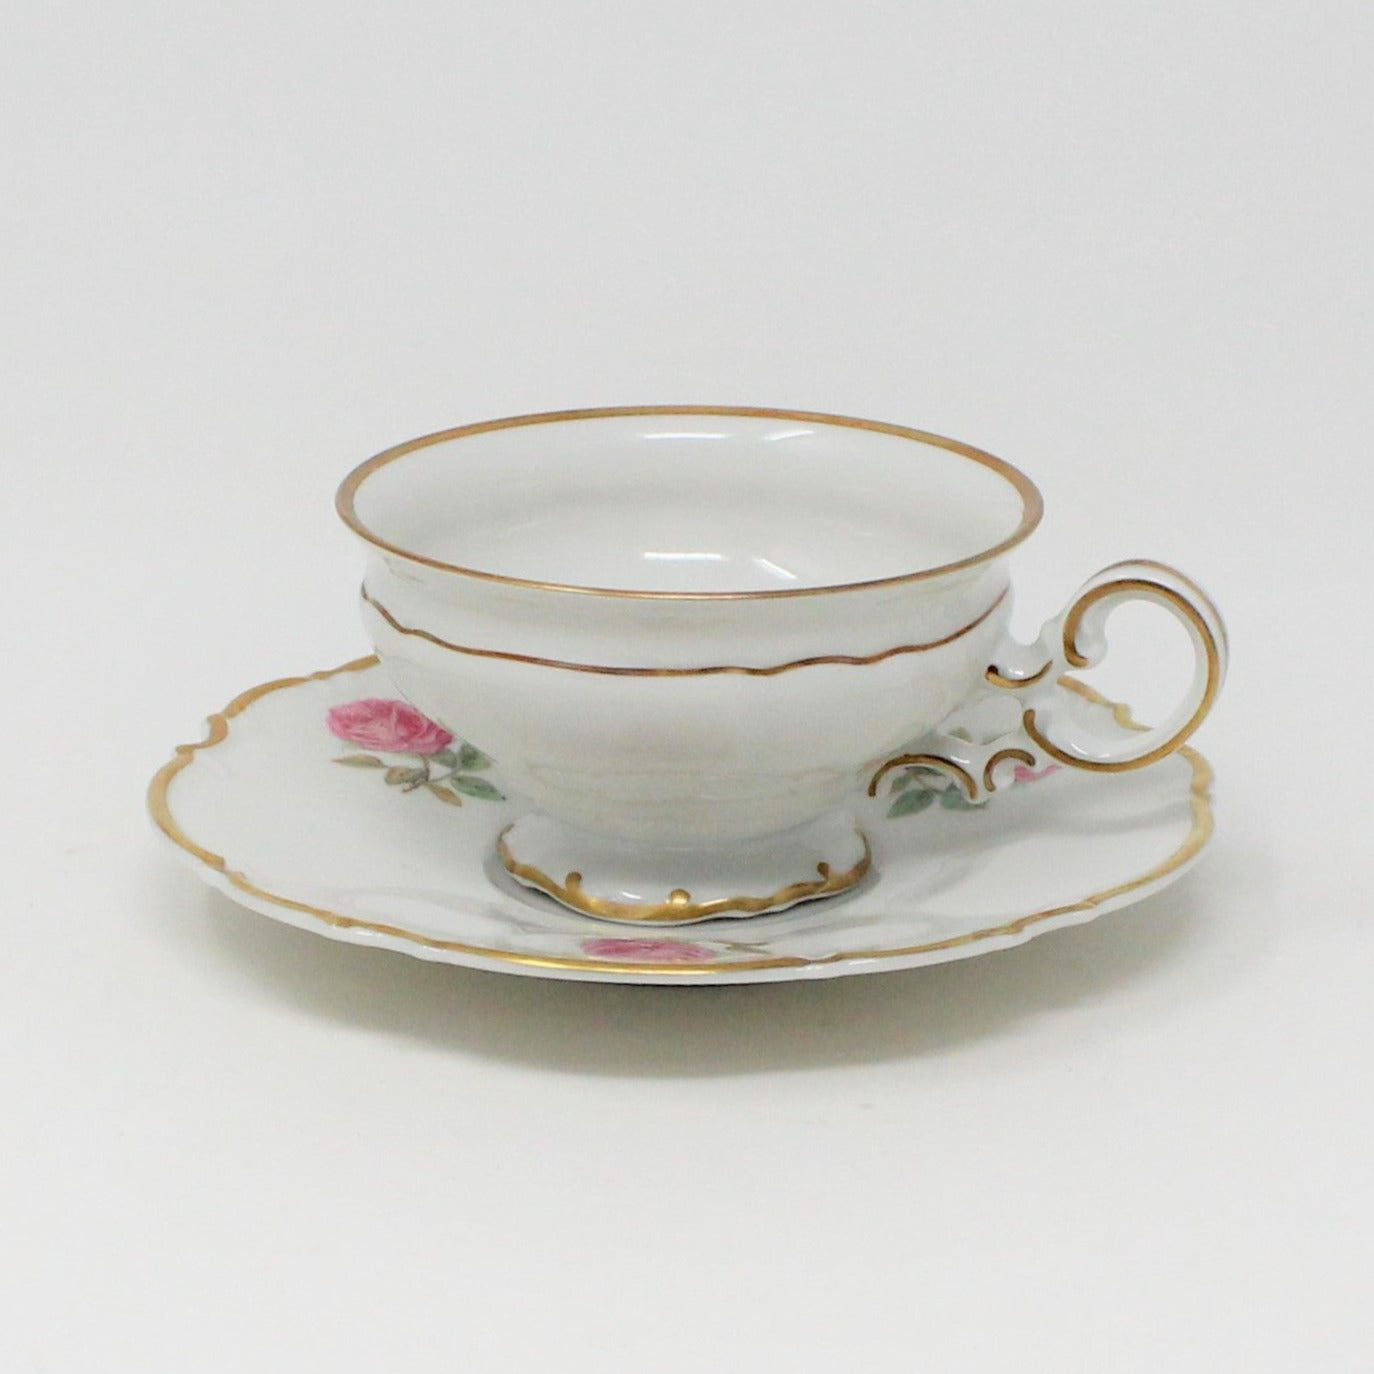 Teacup and Saucer, Hutschenreuther Selb LHS, The Dundee, Pink Rose, Bavaria, Germany, Vintage